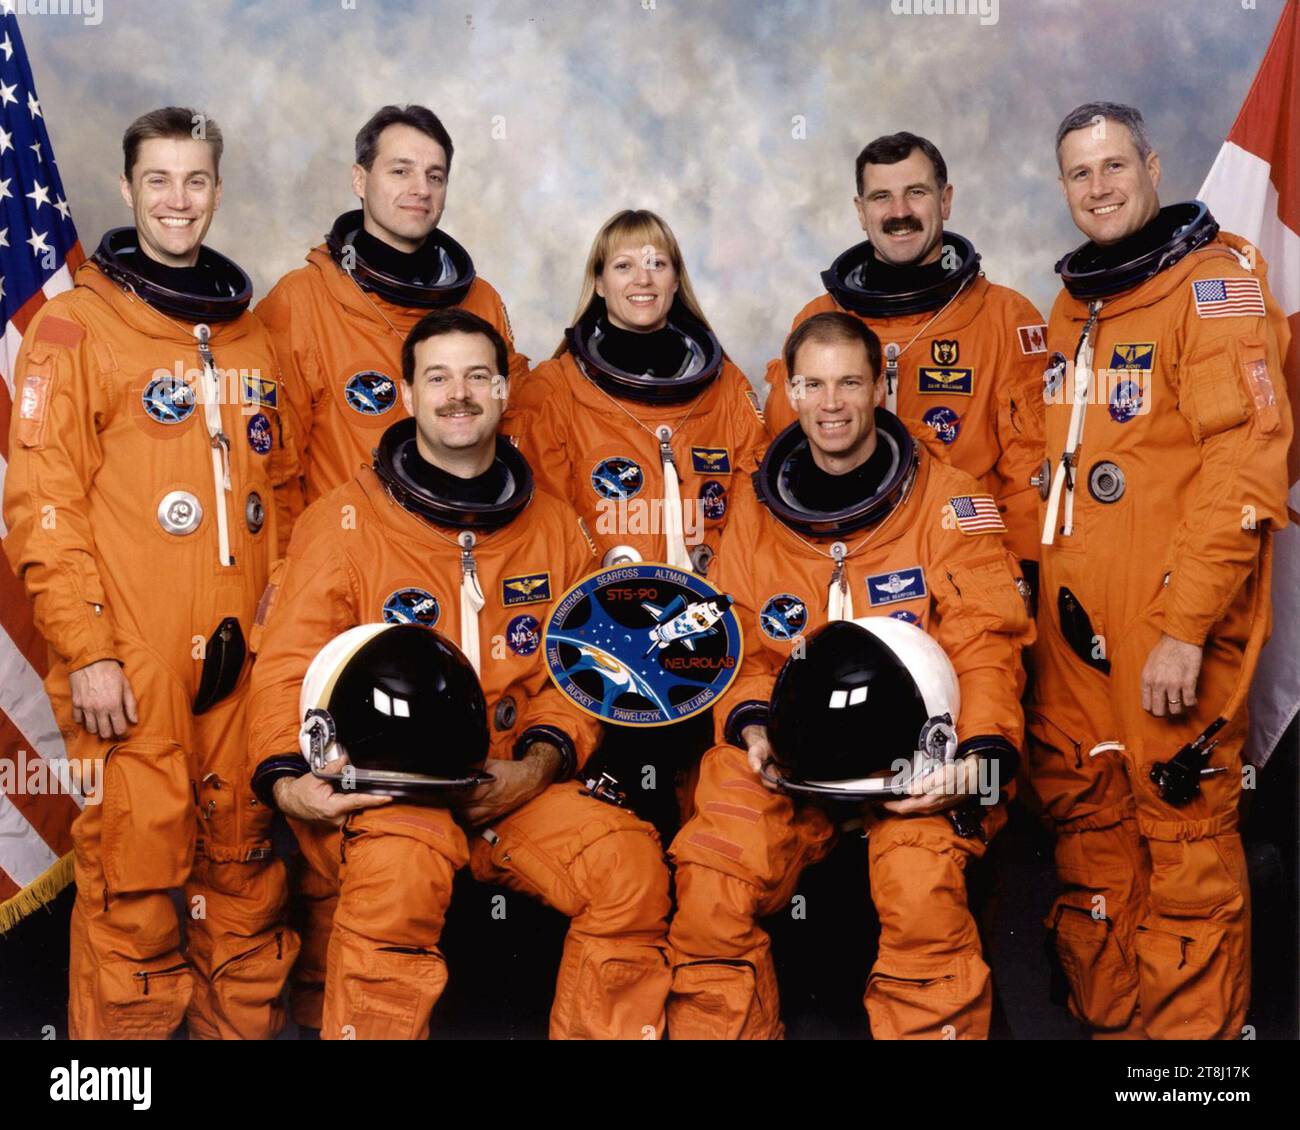 Crew portrait. STS-90 which launched on April 17, 1998. Astronauts Richard A. Searfoss, commander (right front); and Scott D. Altman, pilot (left front). Other crew members (back row, left to right) are James A. (Jim) Pawelczyk, Ph.D., payload specialist; and astronauts Richard M. Linnehan, Kathryn P. Hire, and Dafydd R. (Dave) Williams, all mission specialists; along with payload specialist Jay C. Buckey, Jr., MD. Stock Photo